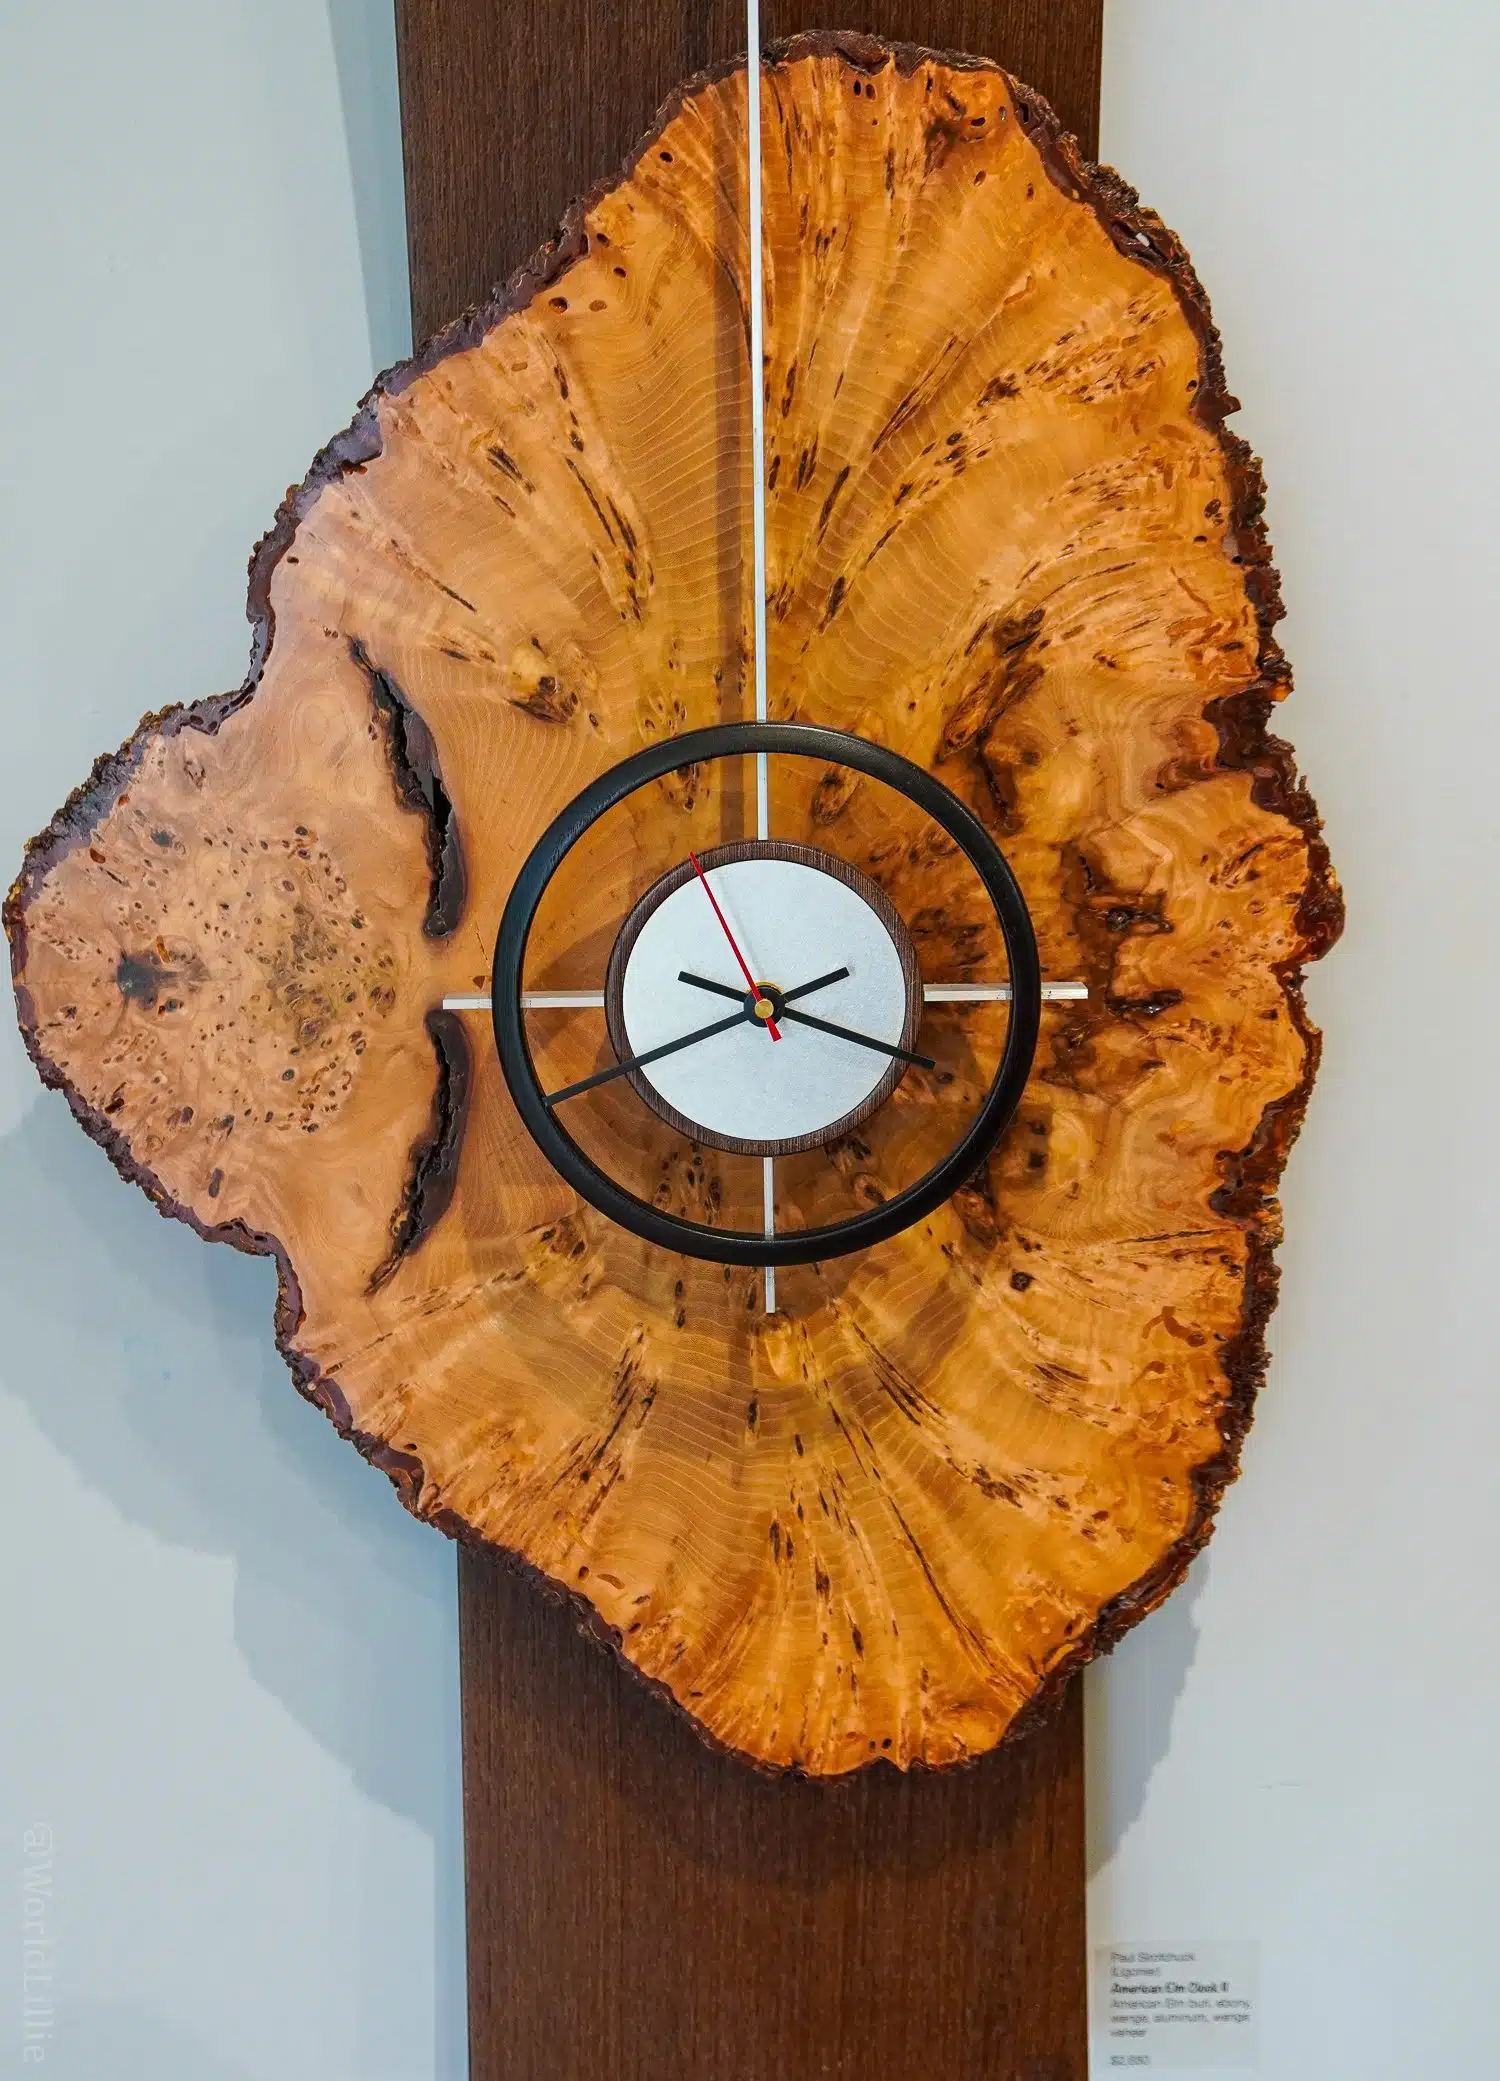 A clock by Paul Sirofchuck using the natural shape of the wood.